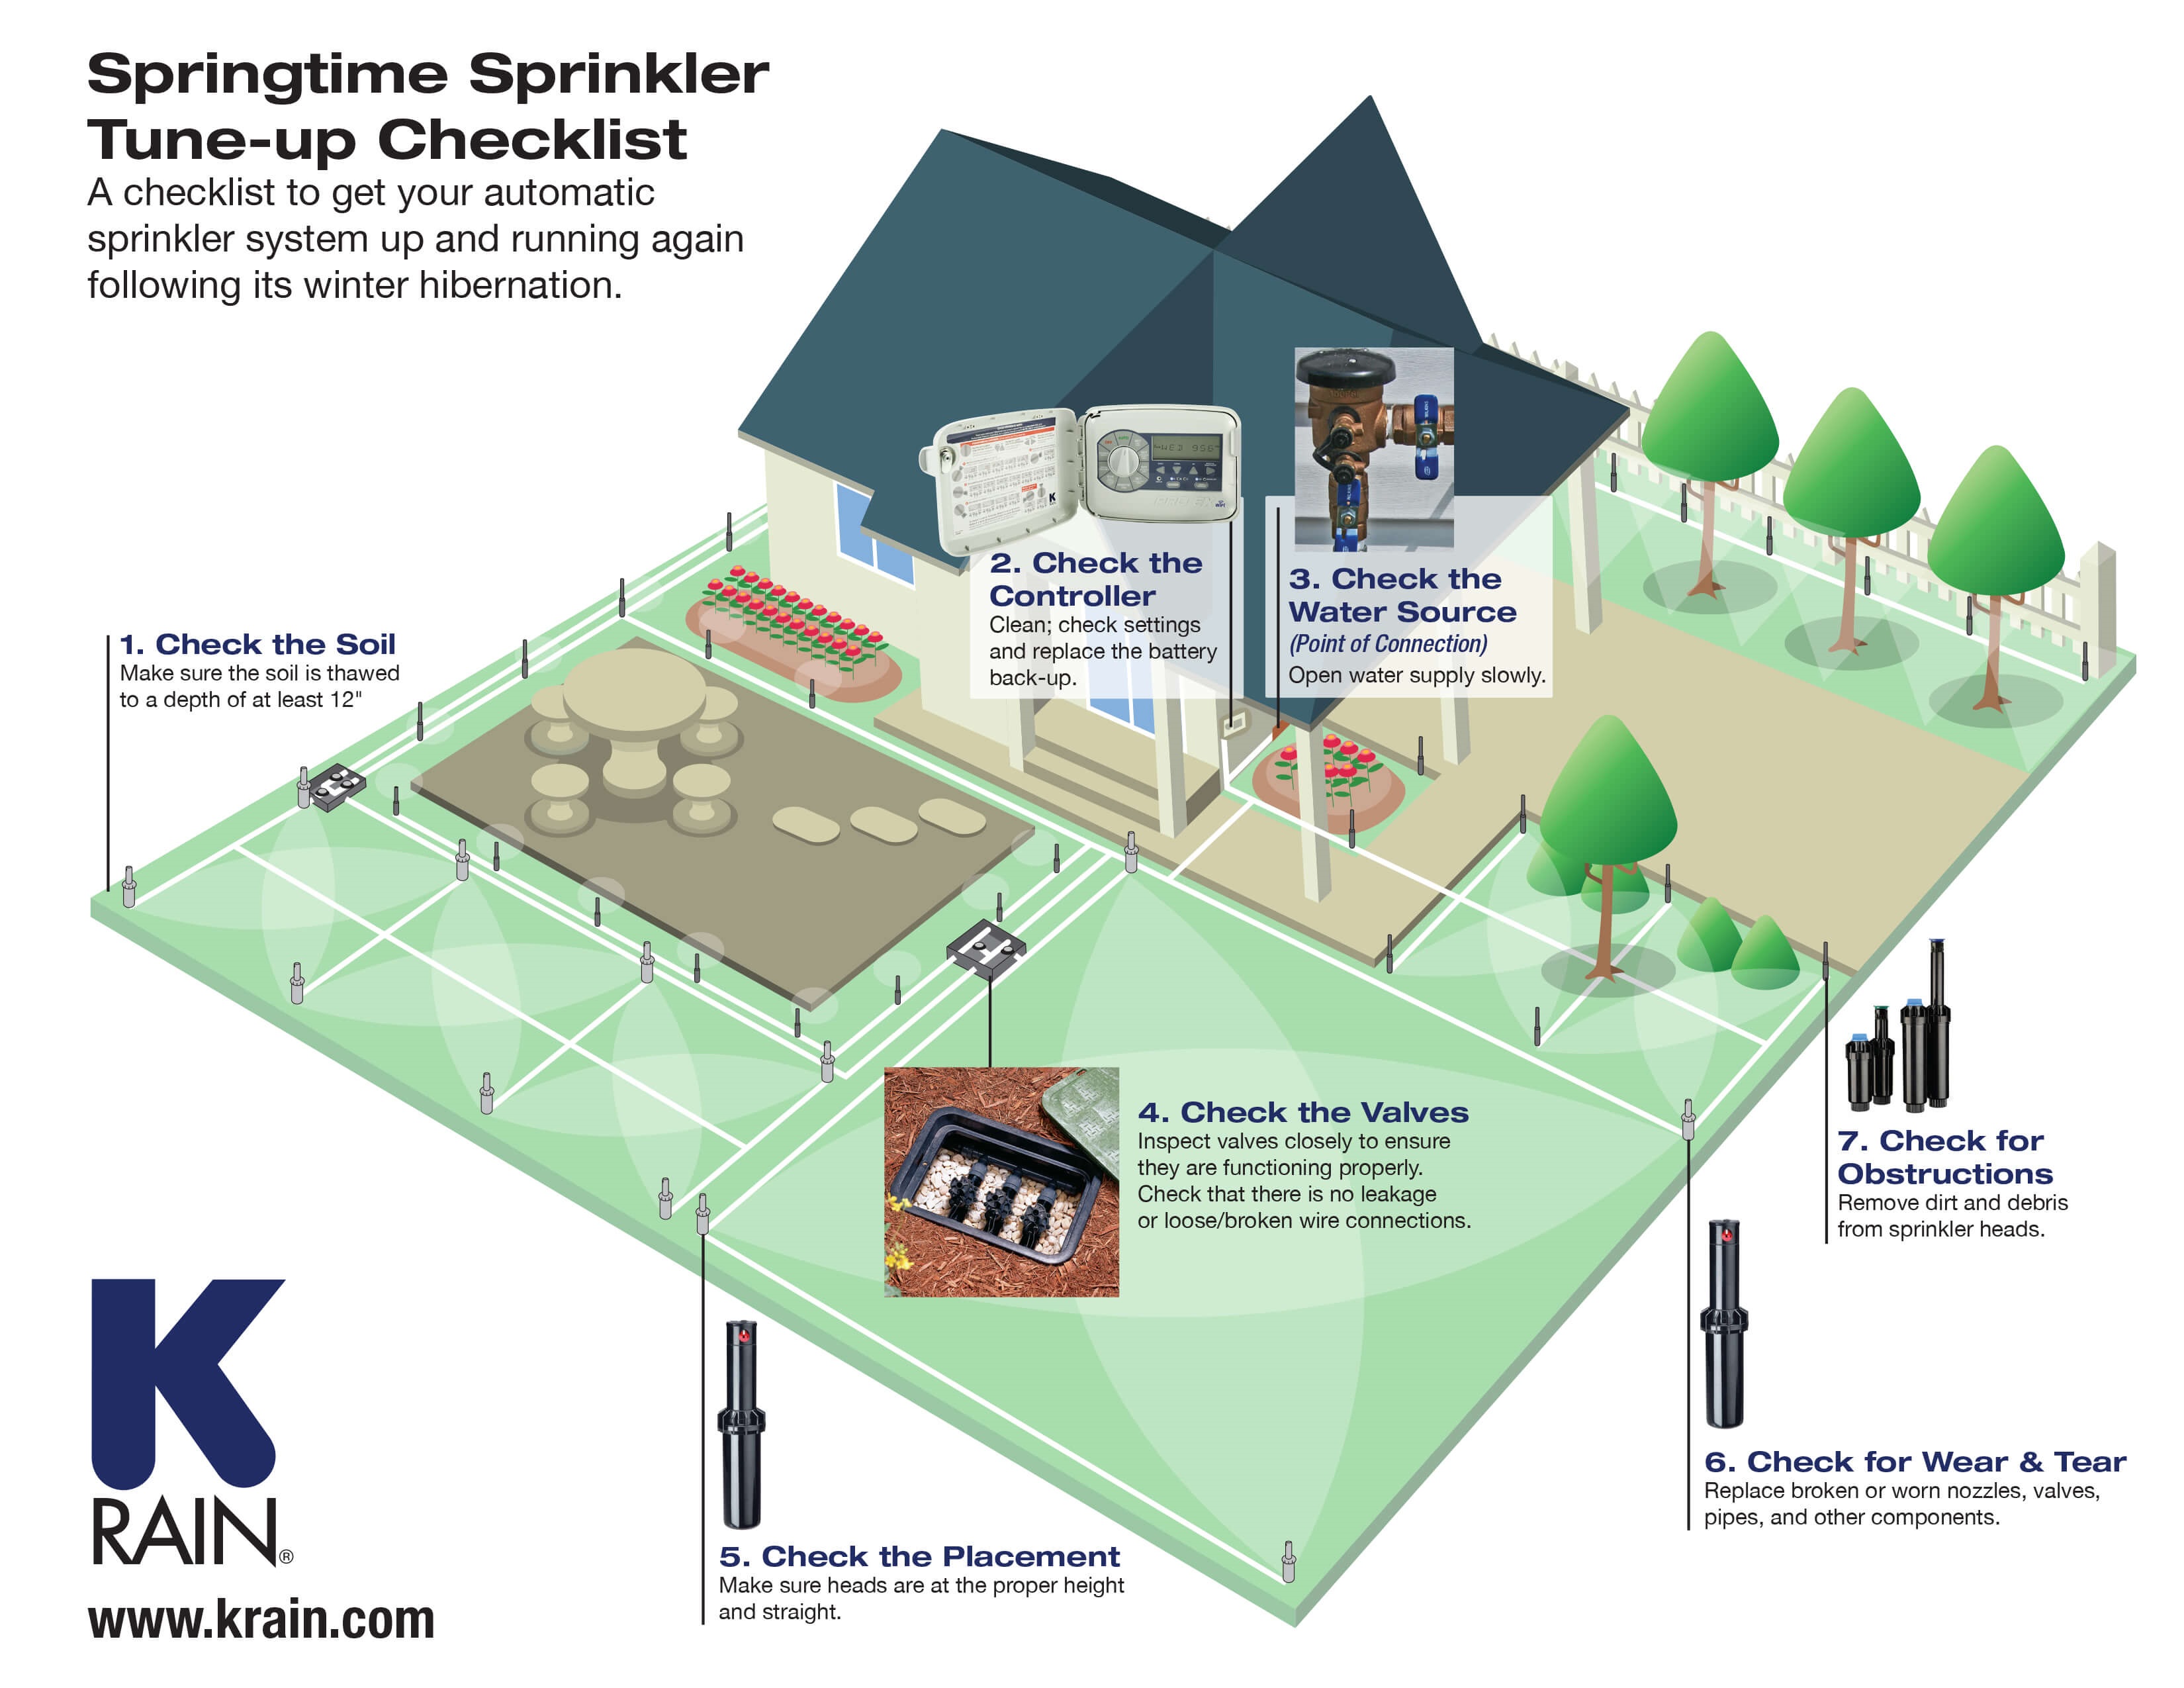 How to Start Up Your Lawn Sprinkler System in Spring